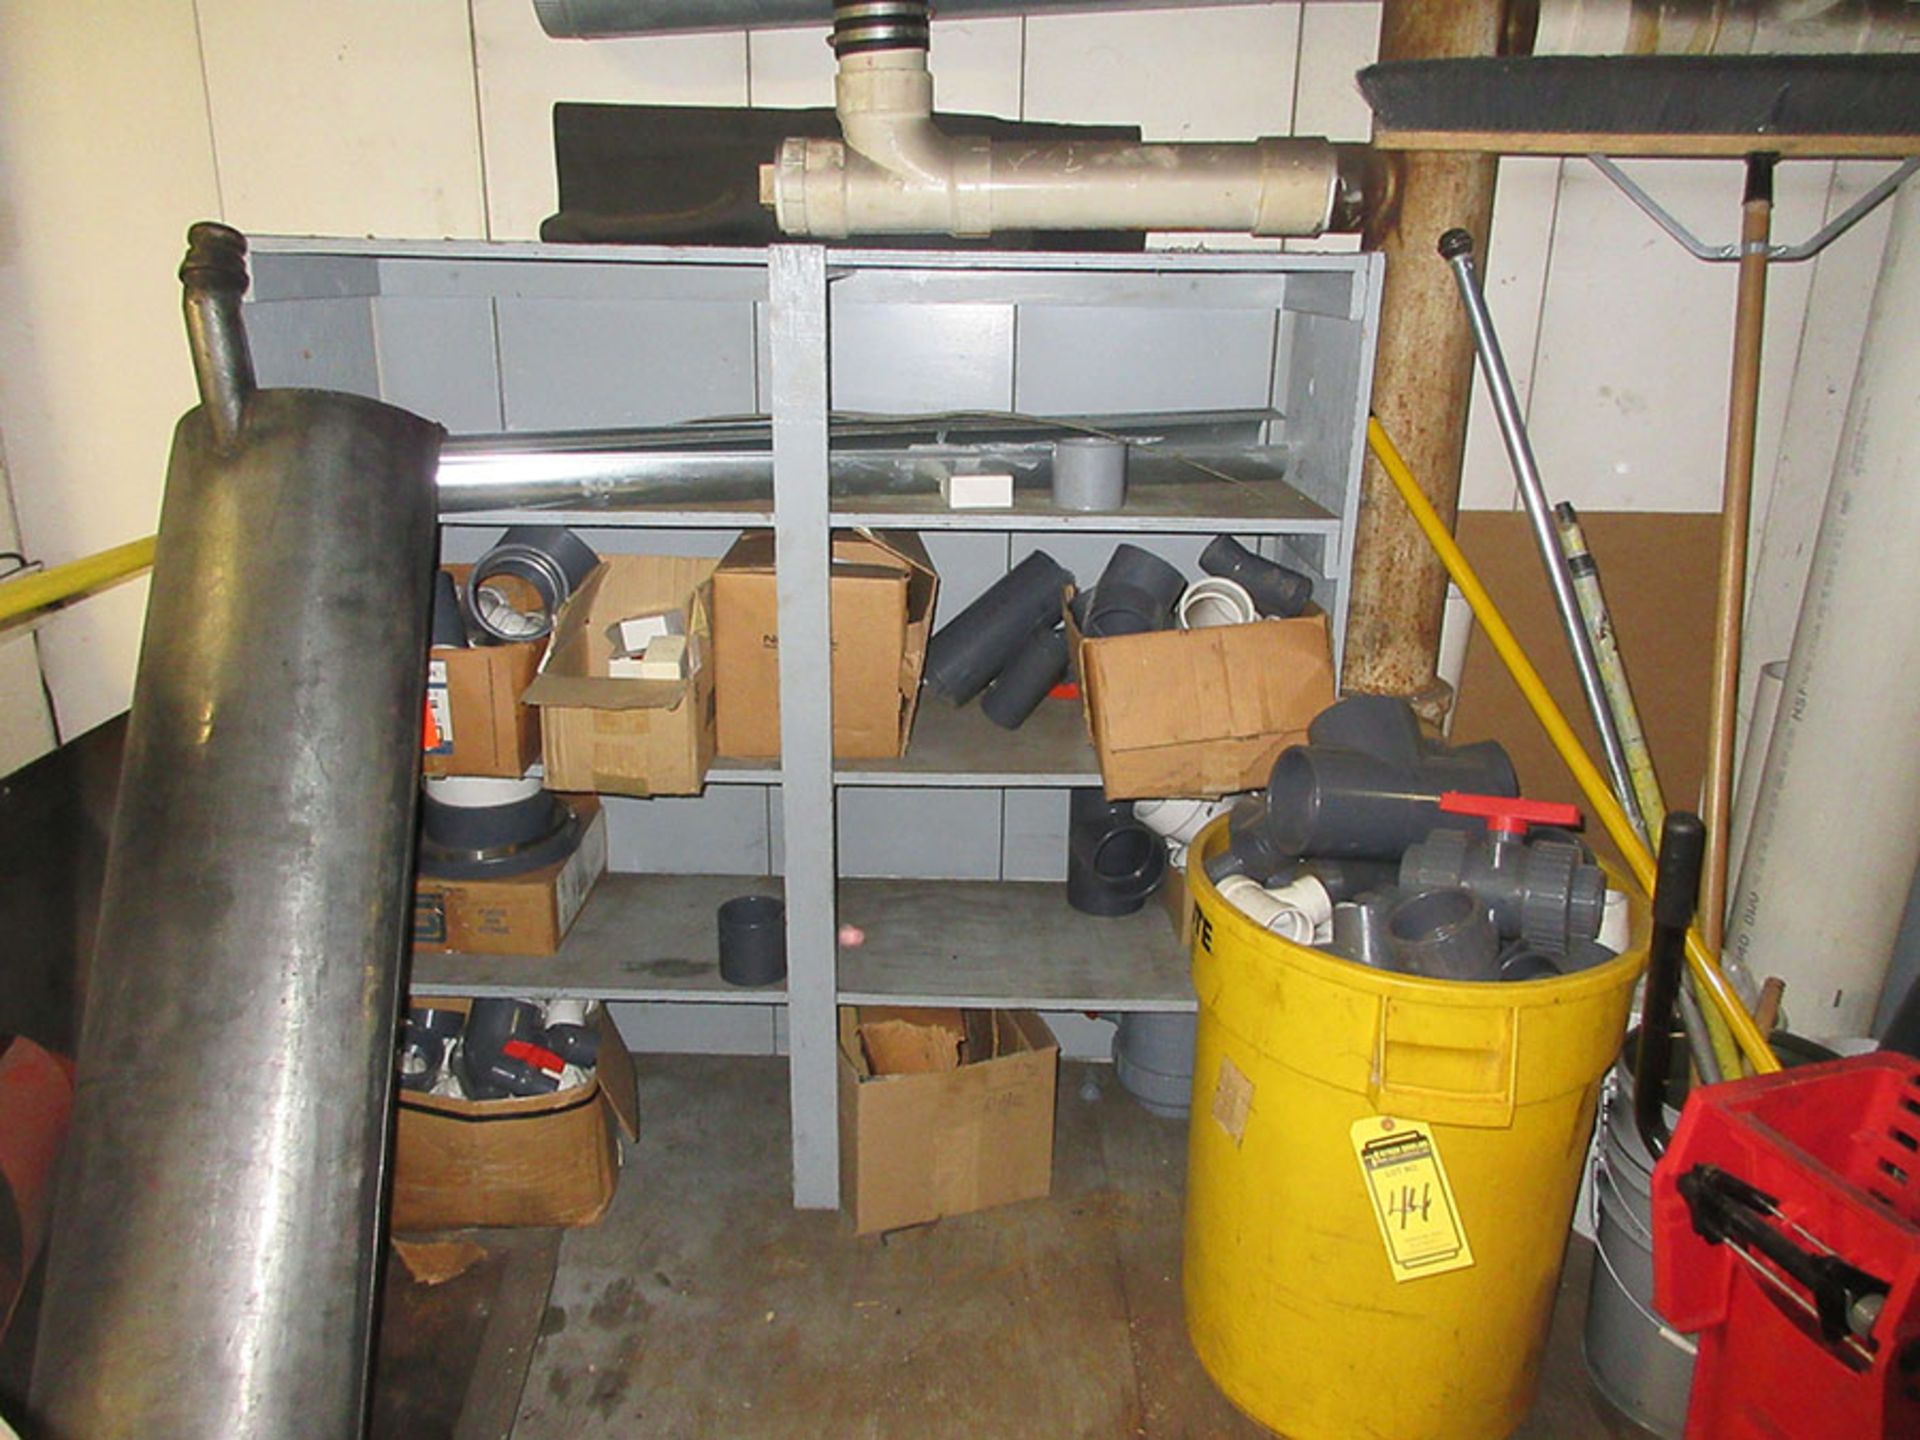 CONTENT ON MEZZANINE; LOCKERS, ROTARY PARTS BINS, AND PLUMBING SUPPLIES - Image 3 of 7